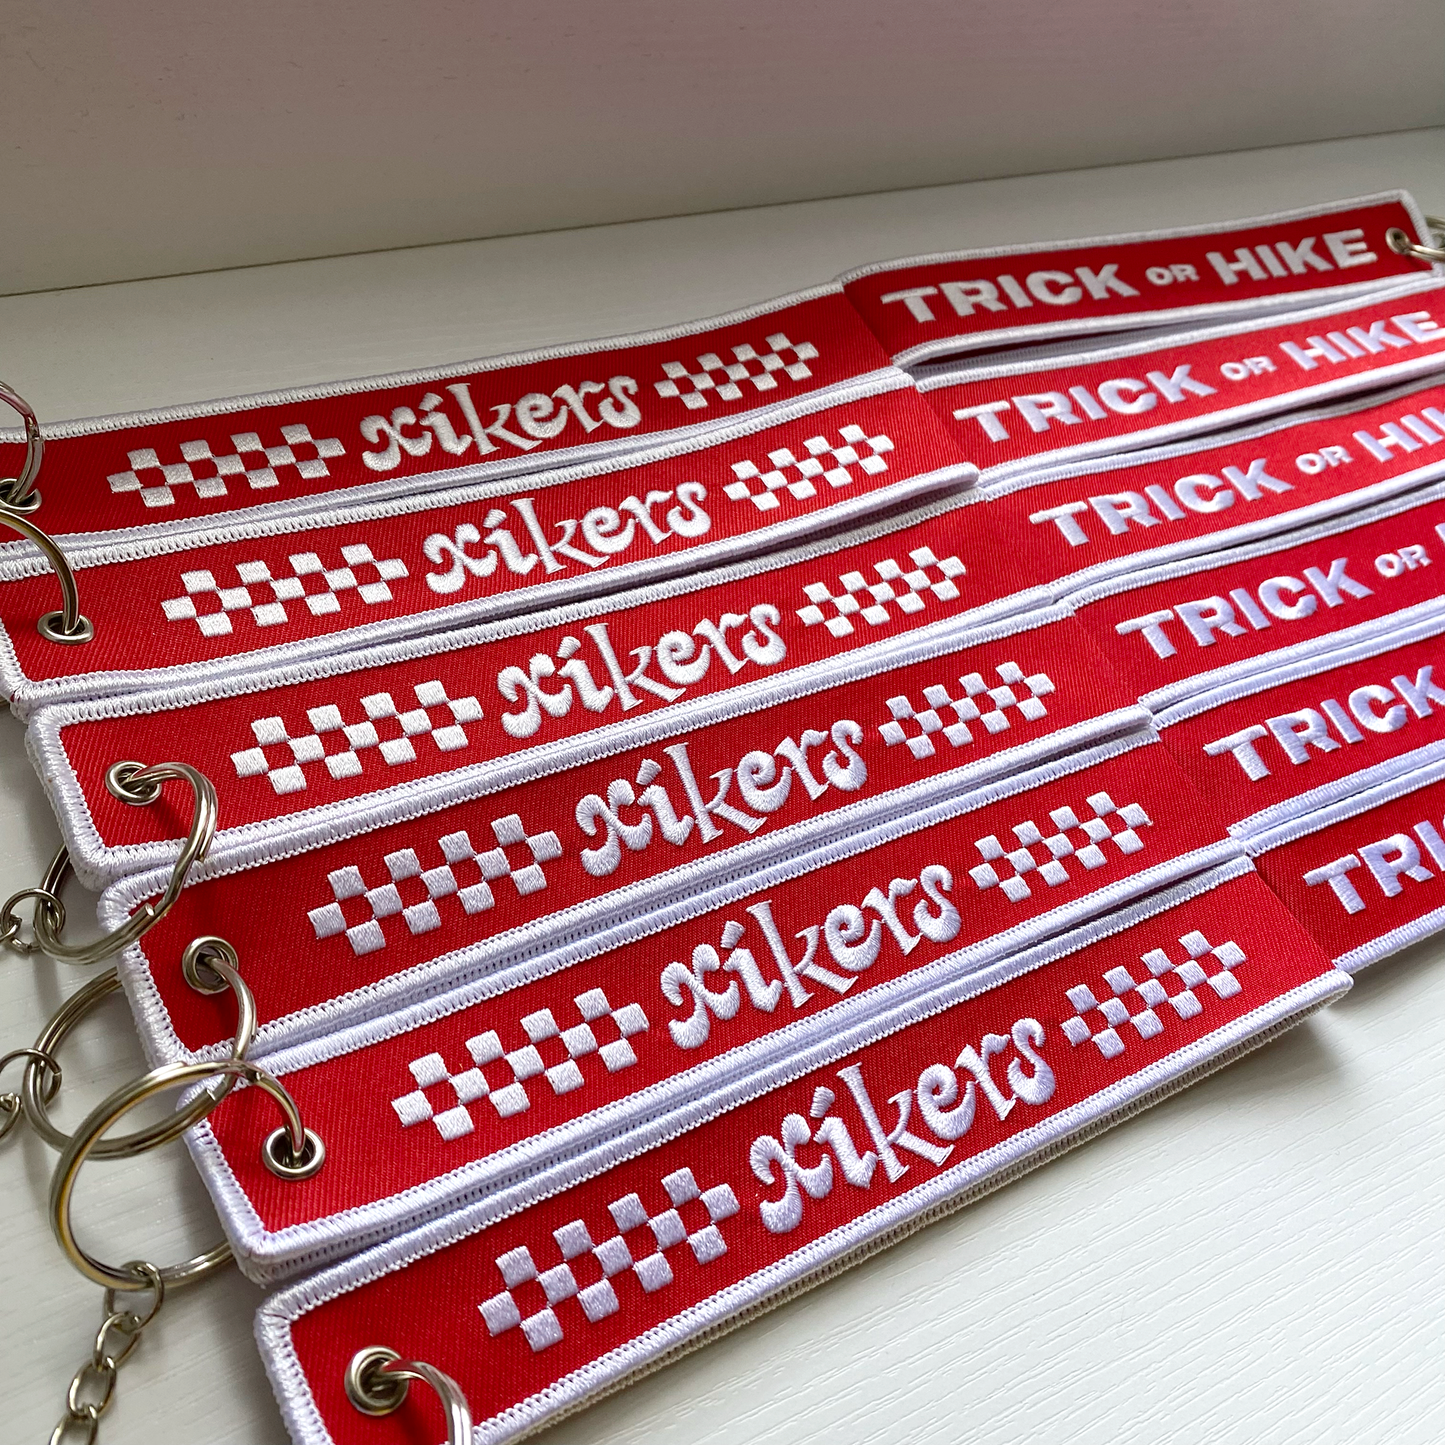 XIKERS Inspired Embroidered Keychain Wristlet